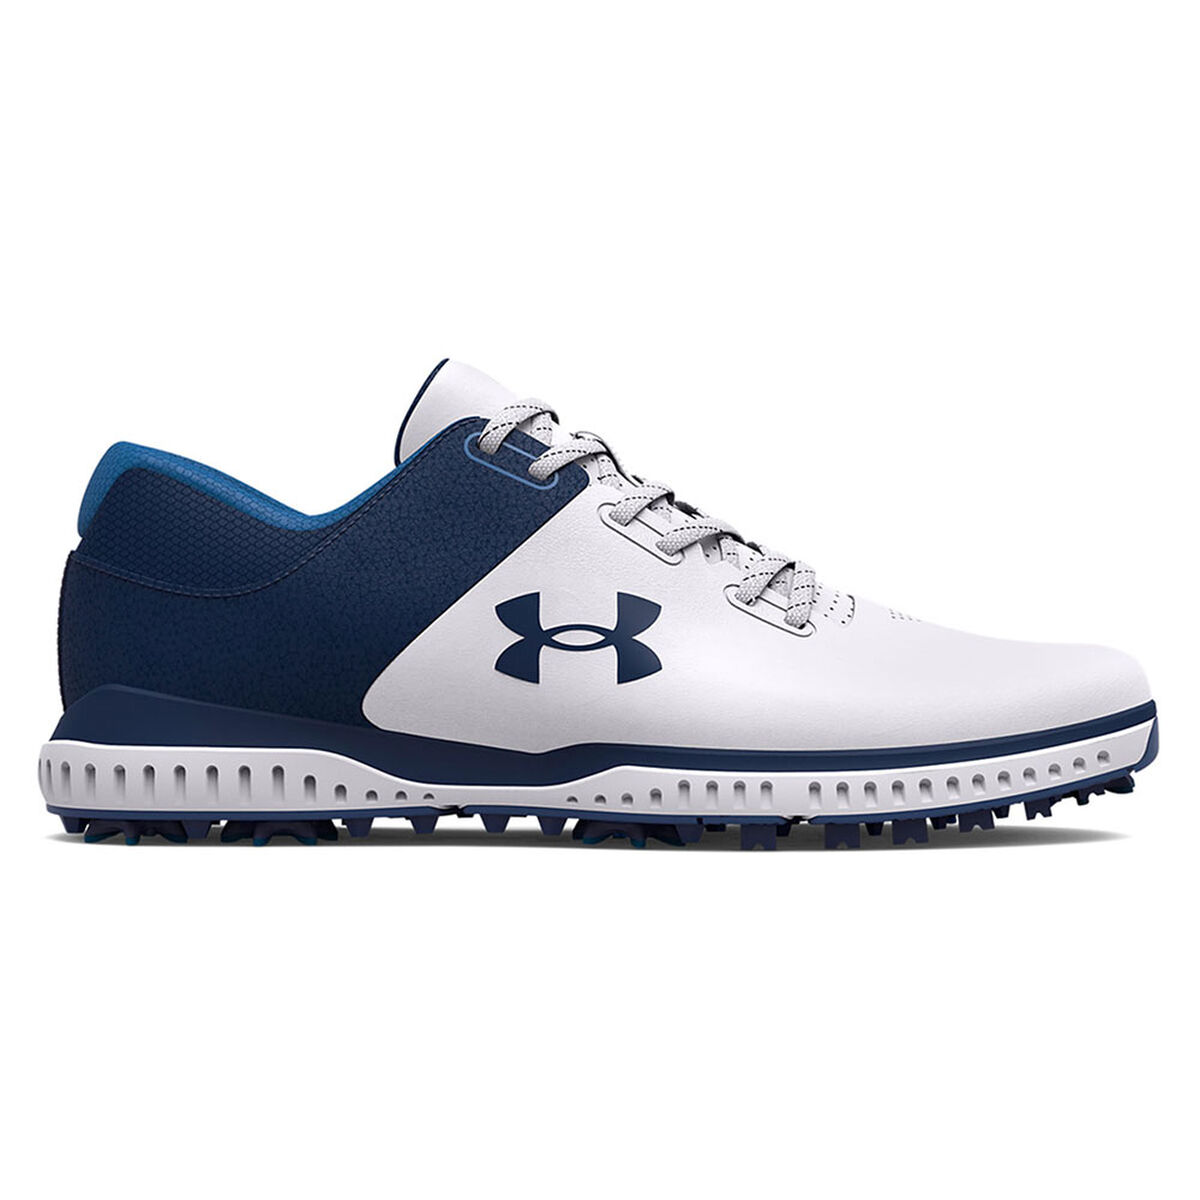 Under Armour Men’s Medal RST Waterproof Spiked Golf Shoes, Mens, White/academy/academy, 10.5 | American Golf